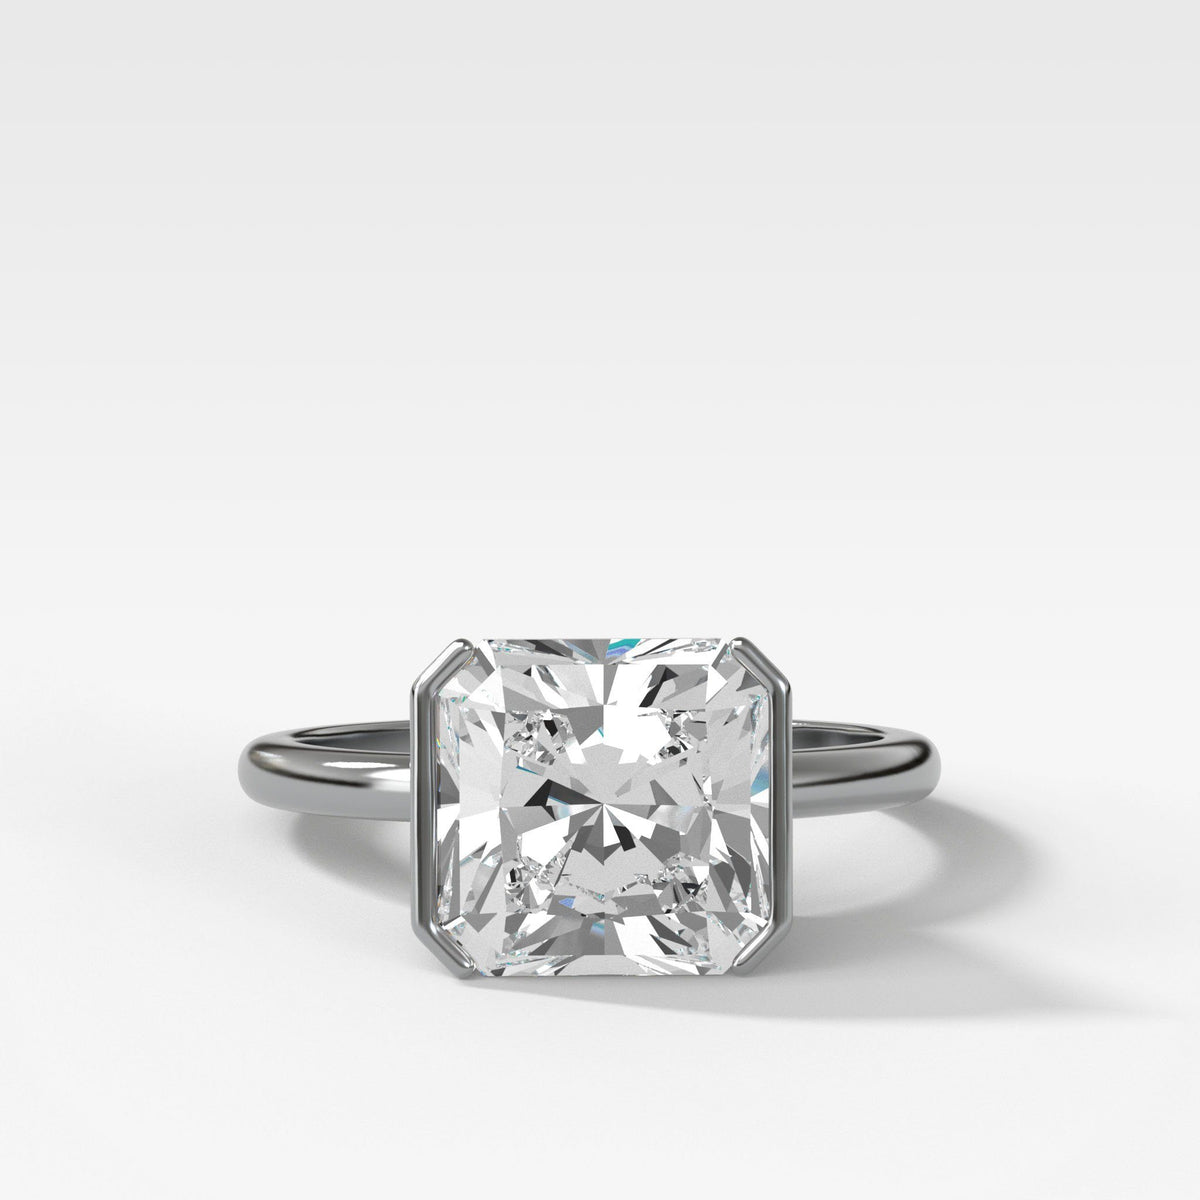 Half Bezel Solitaire Engagement Ring With Square Radiant Cut by Good Stone in White Gold